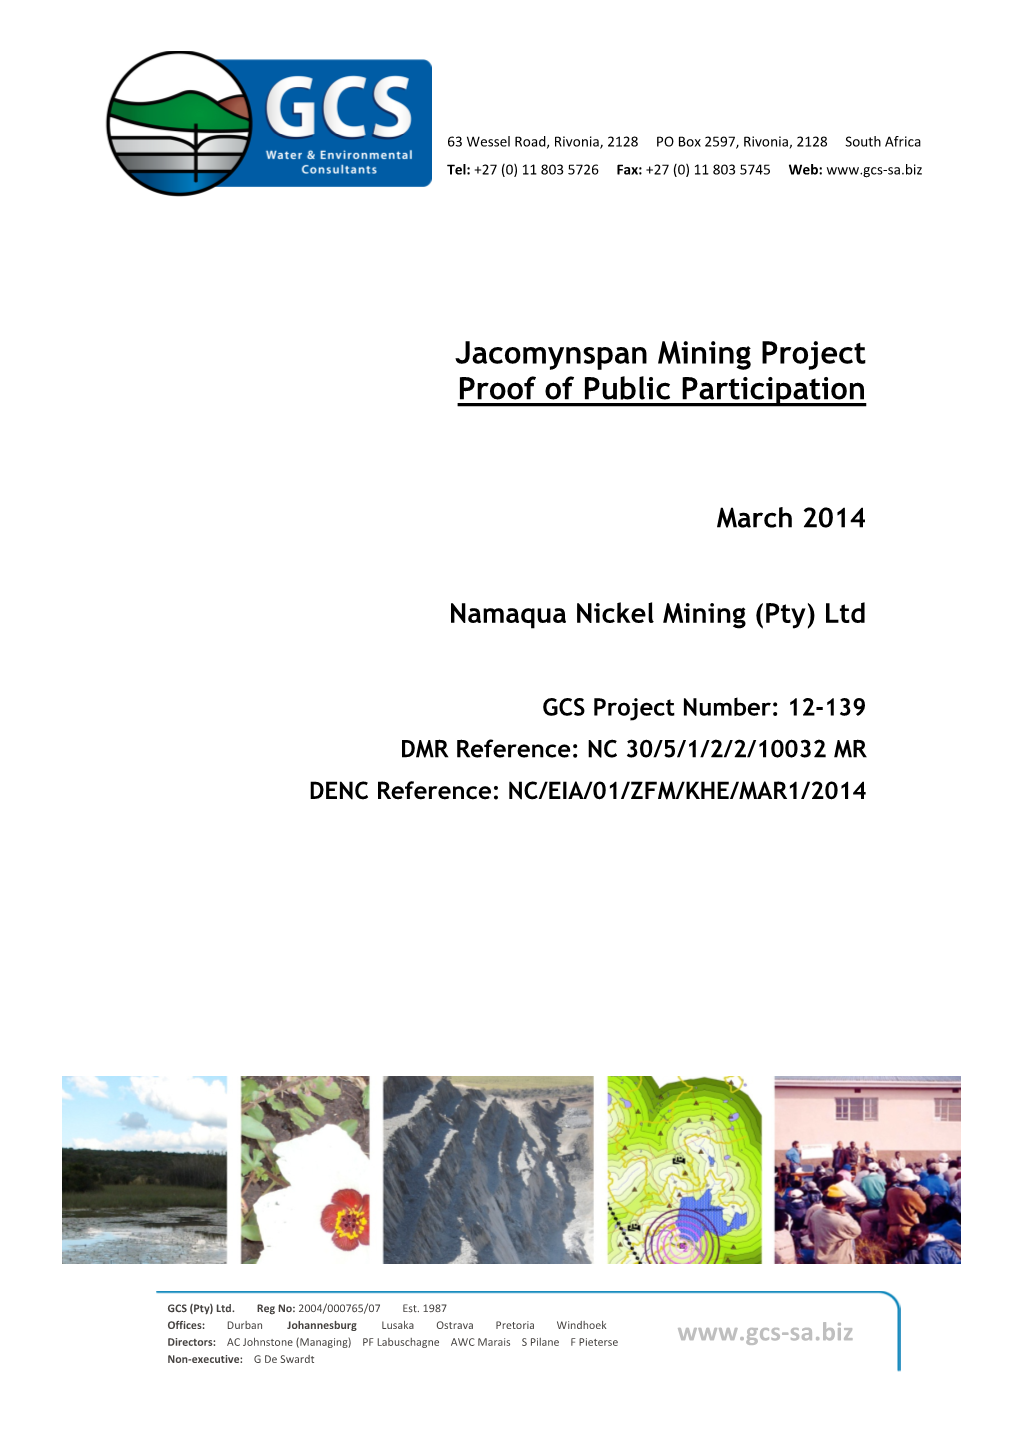 Jacomynspan Mining Project Proof of Public Participation